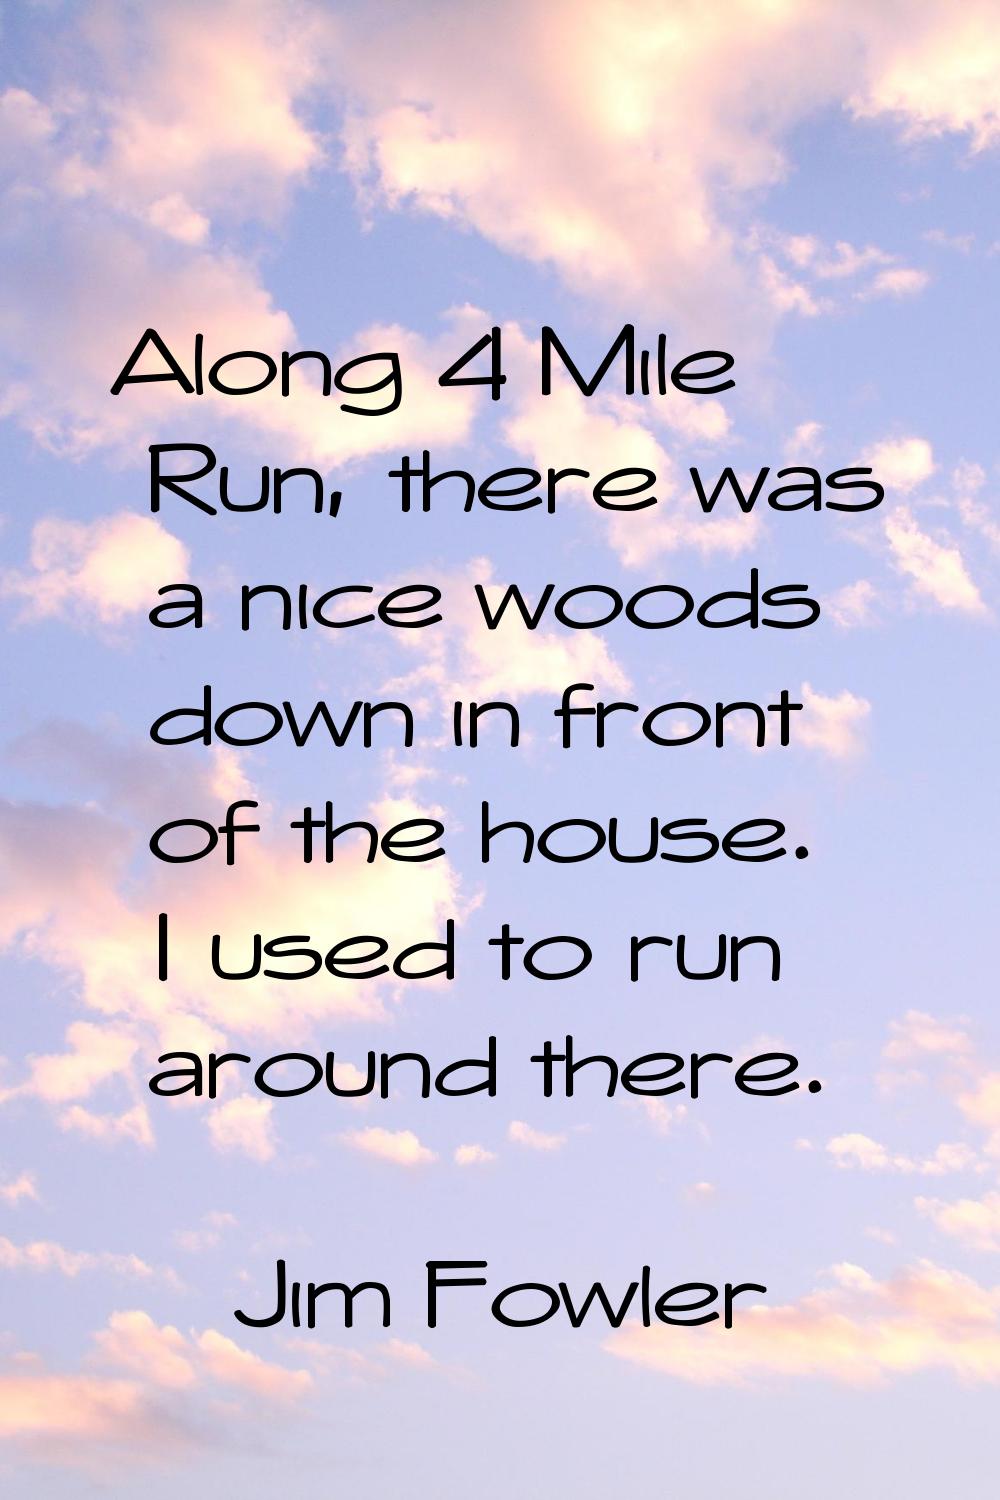 Along 4 Mile Run, there was a nice woods down in front of the house. I used to run around there.